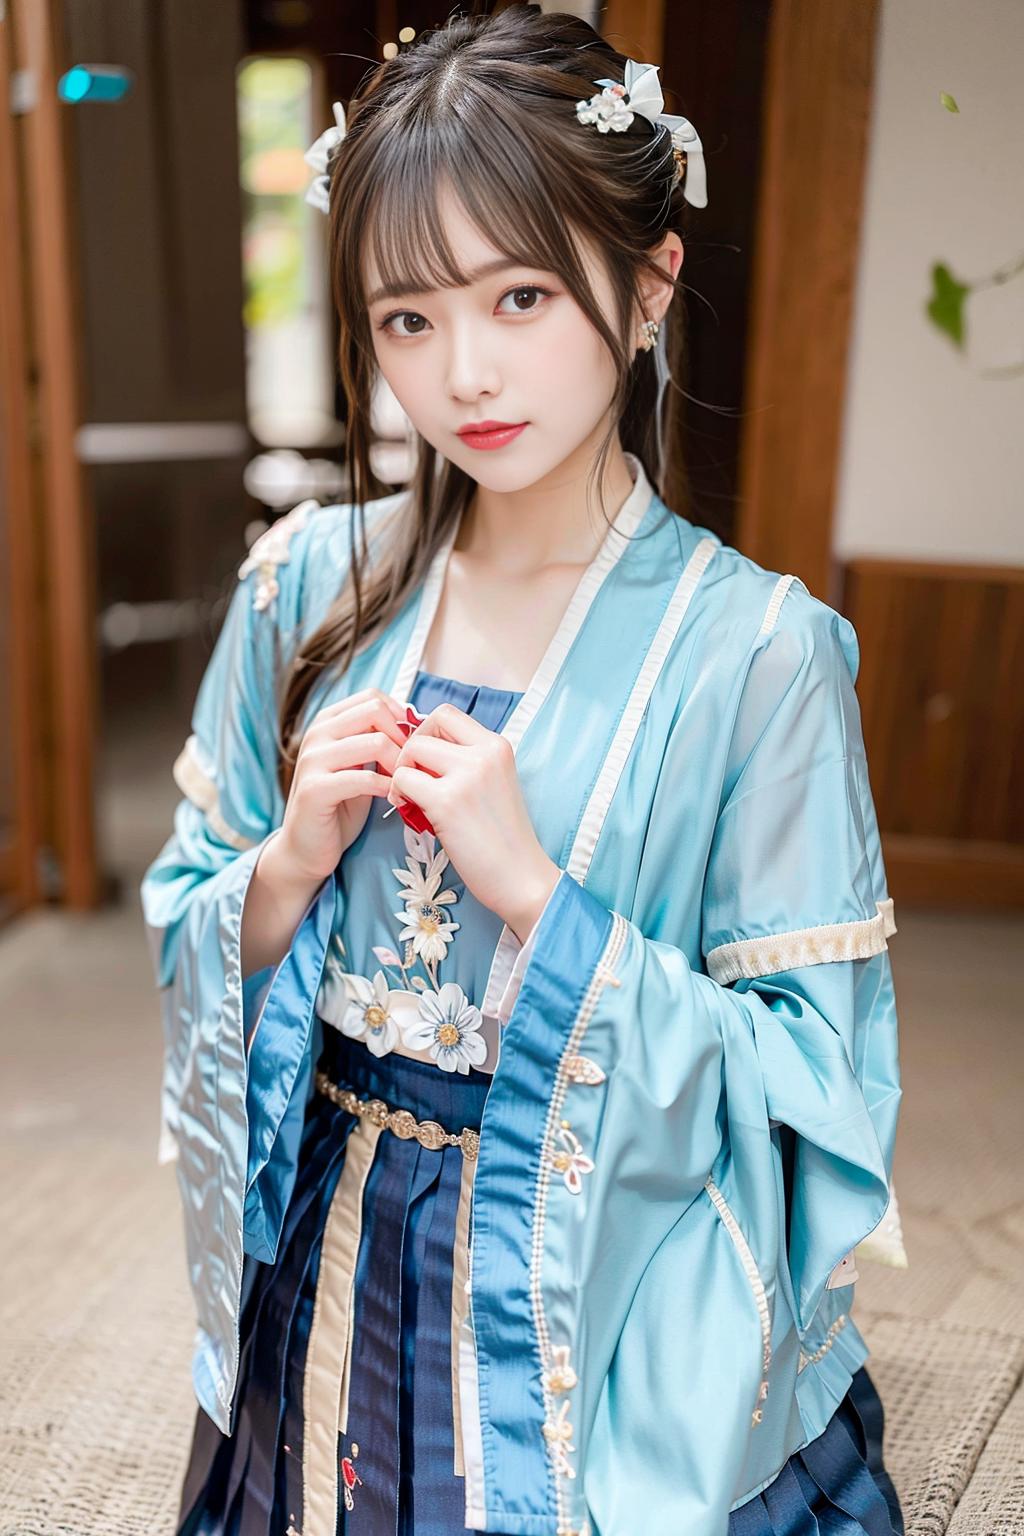 A woman wearing a blue kimono with a flower design is posing for a picture.